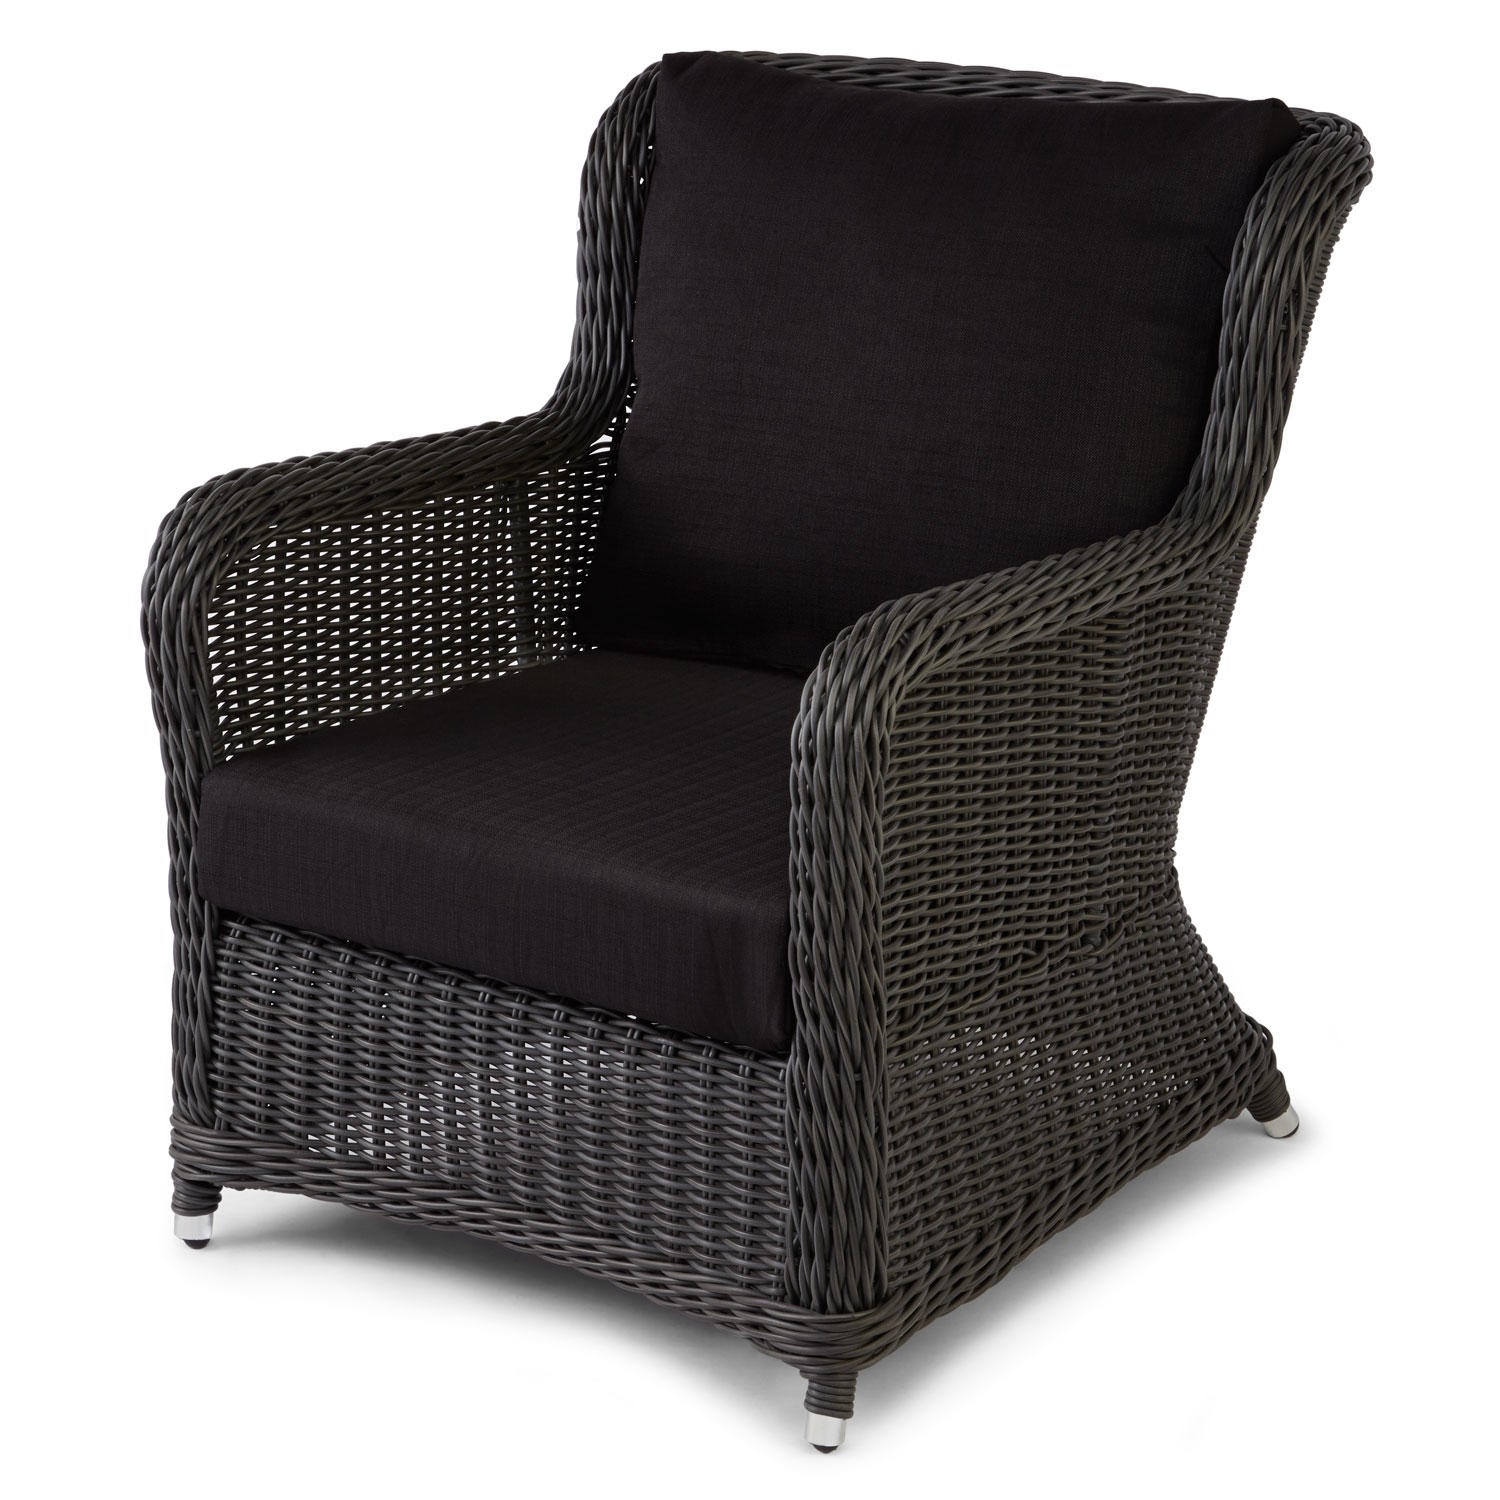 Michio resin wicker armless chair and cushion outdoor